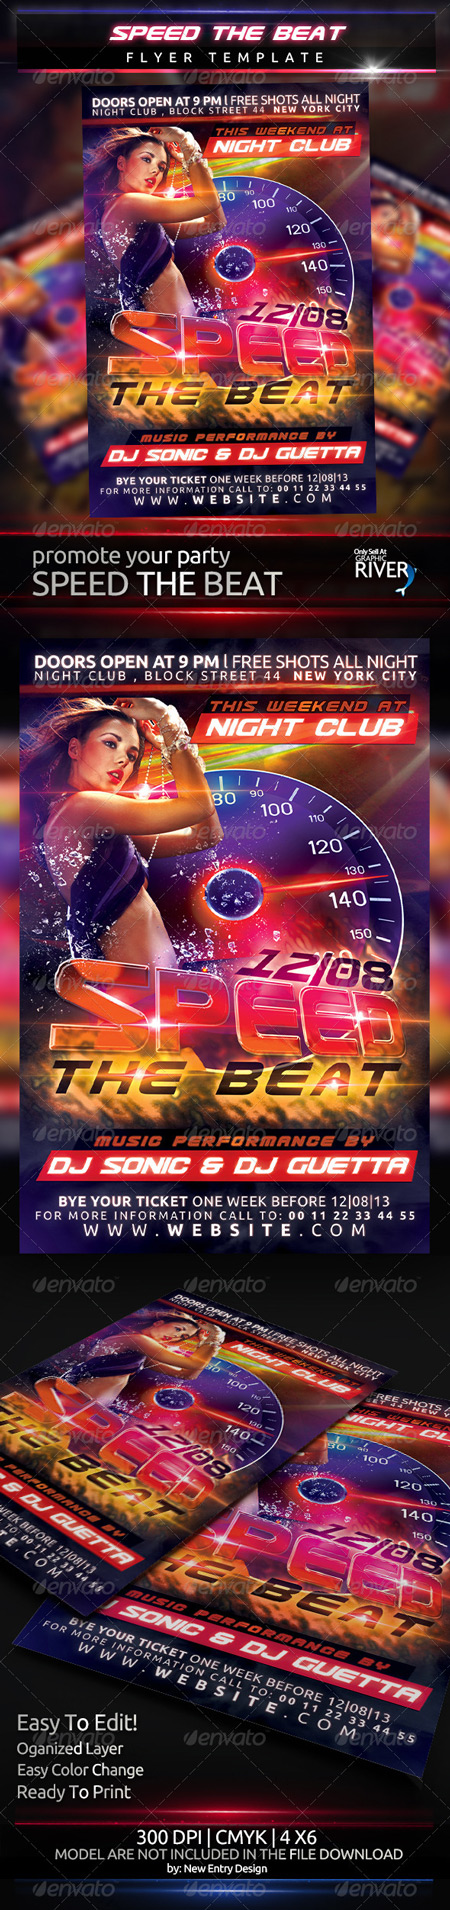 Speed The Beat Flyer Template 4948934